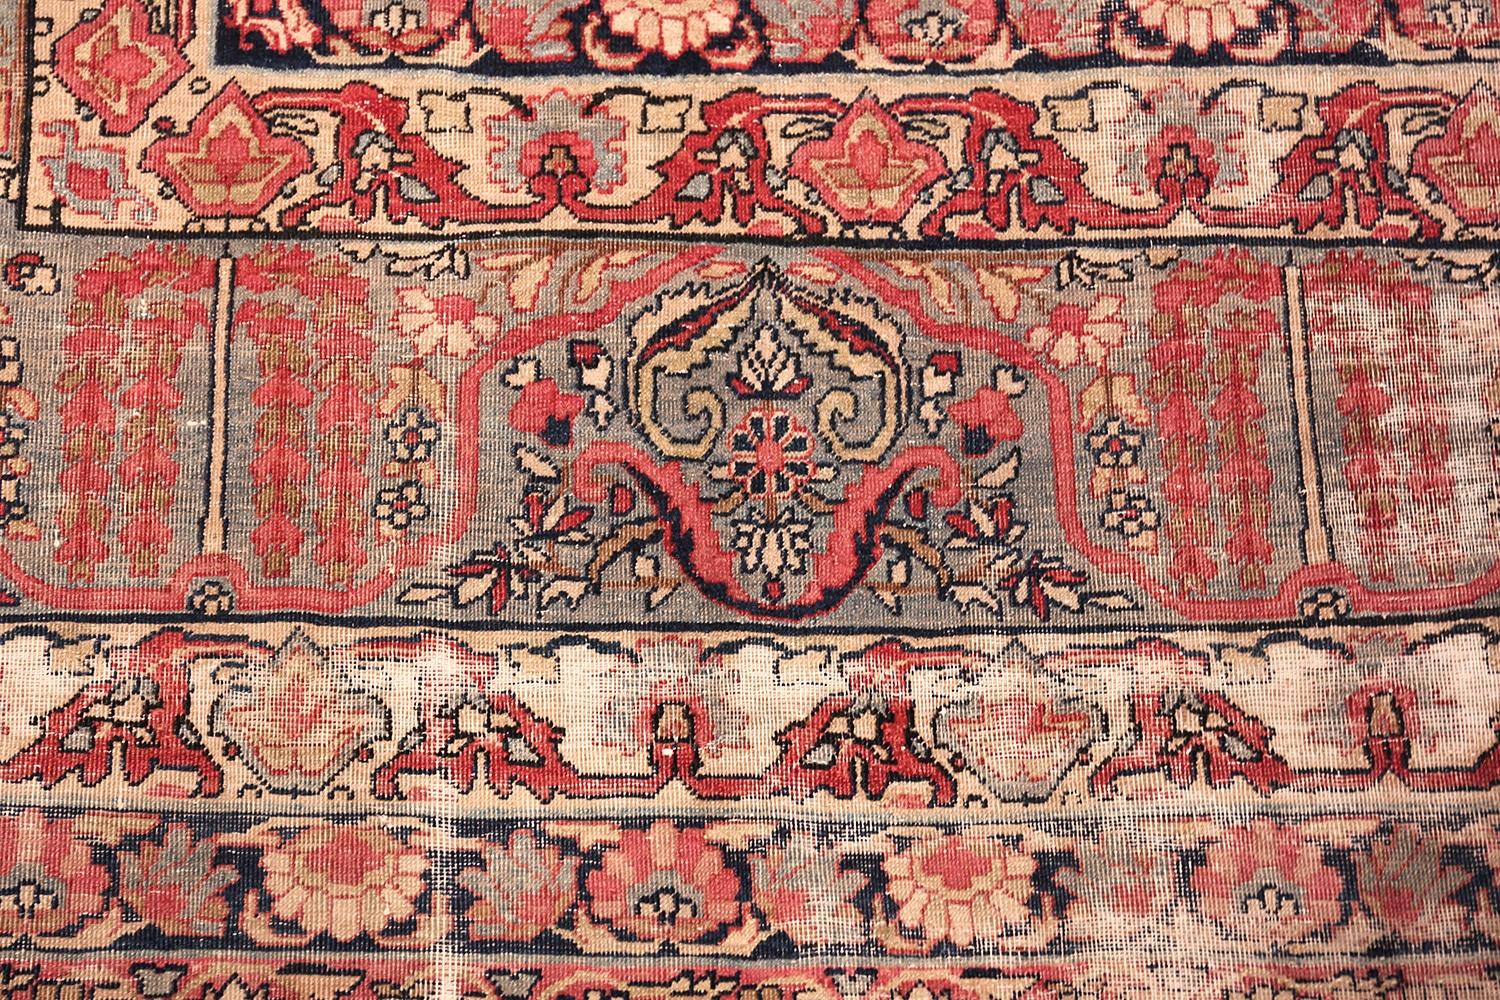 Beautiful shabby chic antique Persian Kerman rug, country of origin: Persia, circa 1900.Size: 9 ft 10 in x 14 ft 4 in (3 m x 4.37 m)

The refined character and gorgeous colors of this Persian Kerman rug form the turn of the 20th century are